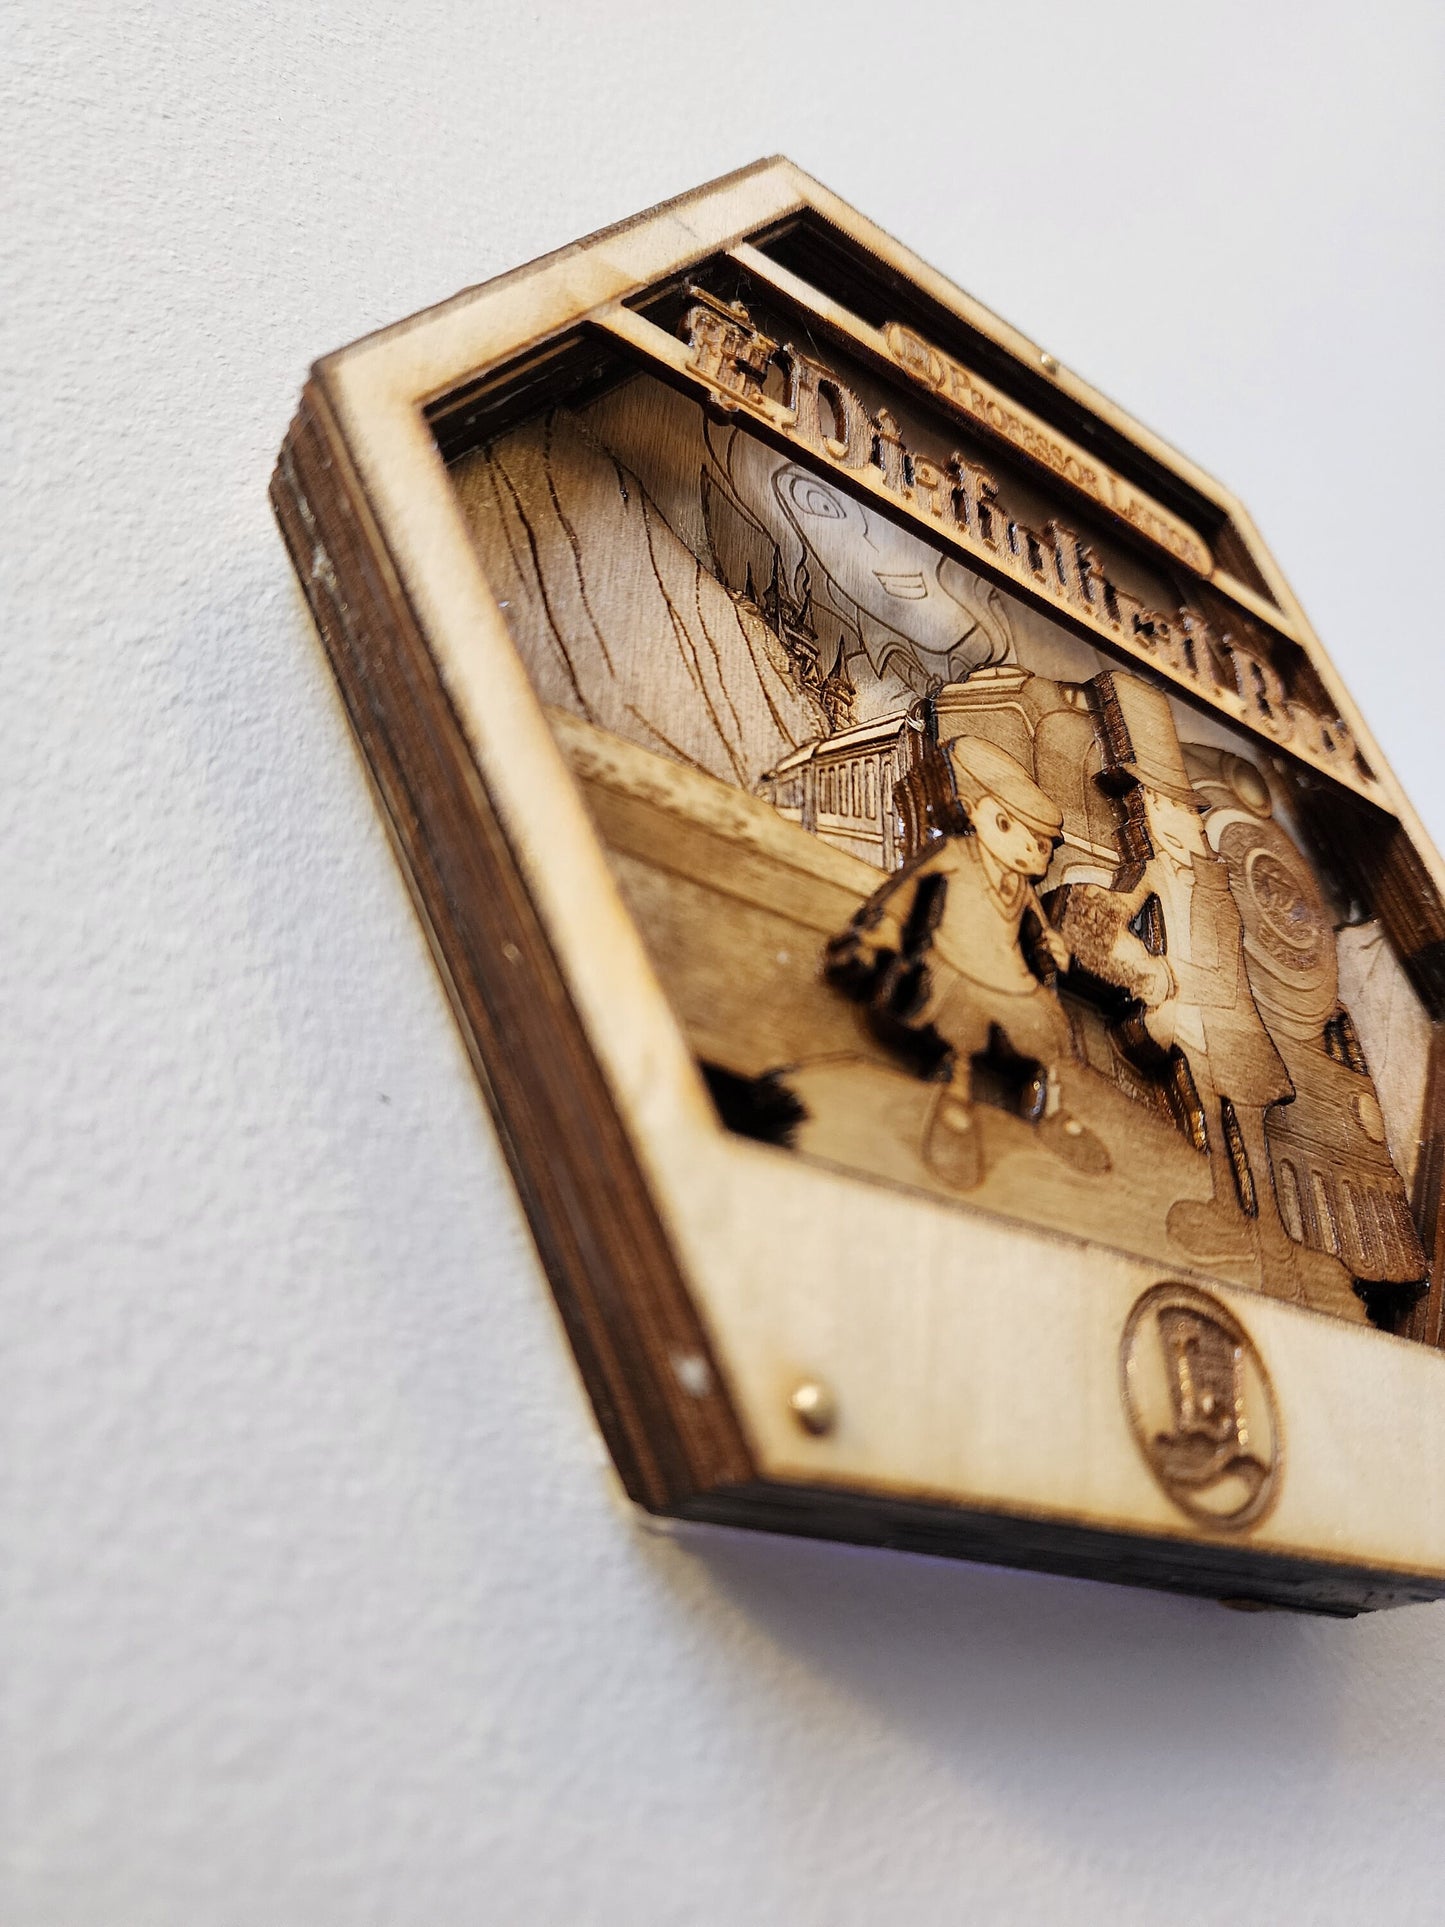 Professor Layton | Diabolical Box | 3D Wooden Artwork PlaqueArts | Unforgettable gift for gamers